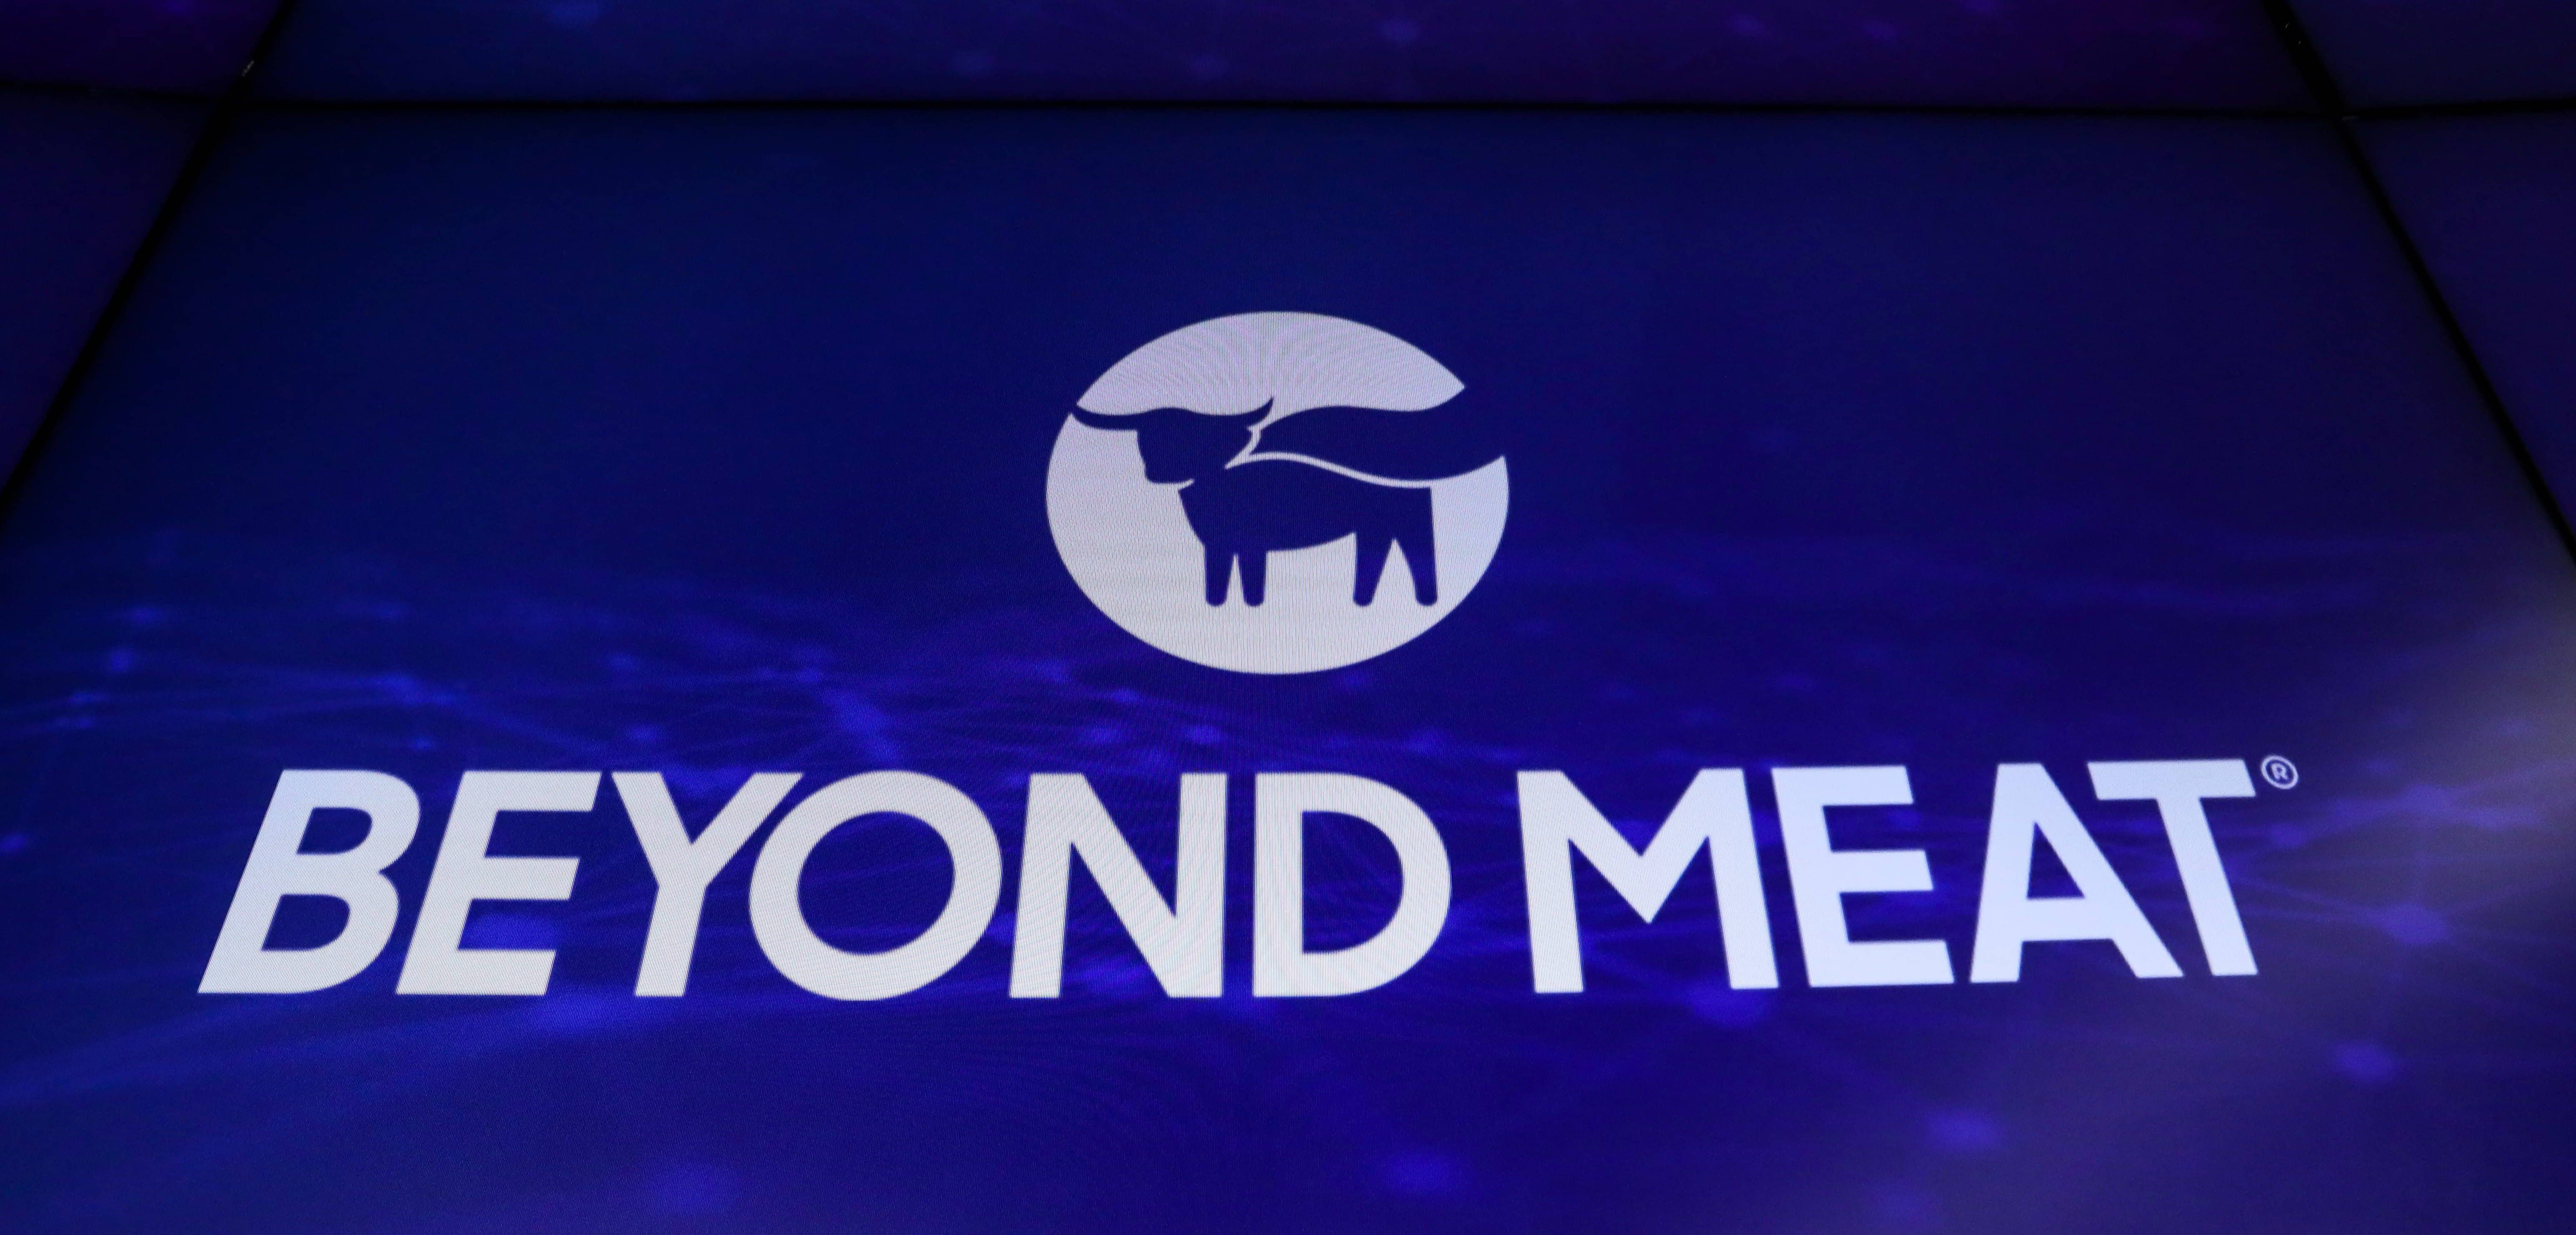 the-company-logo-and-trading-information-for-beyond-meat-is-displayed-on-a-screen-during-the-ipo-at-the-nasdaq-market-site-in-new-york